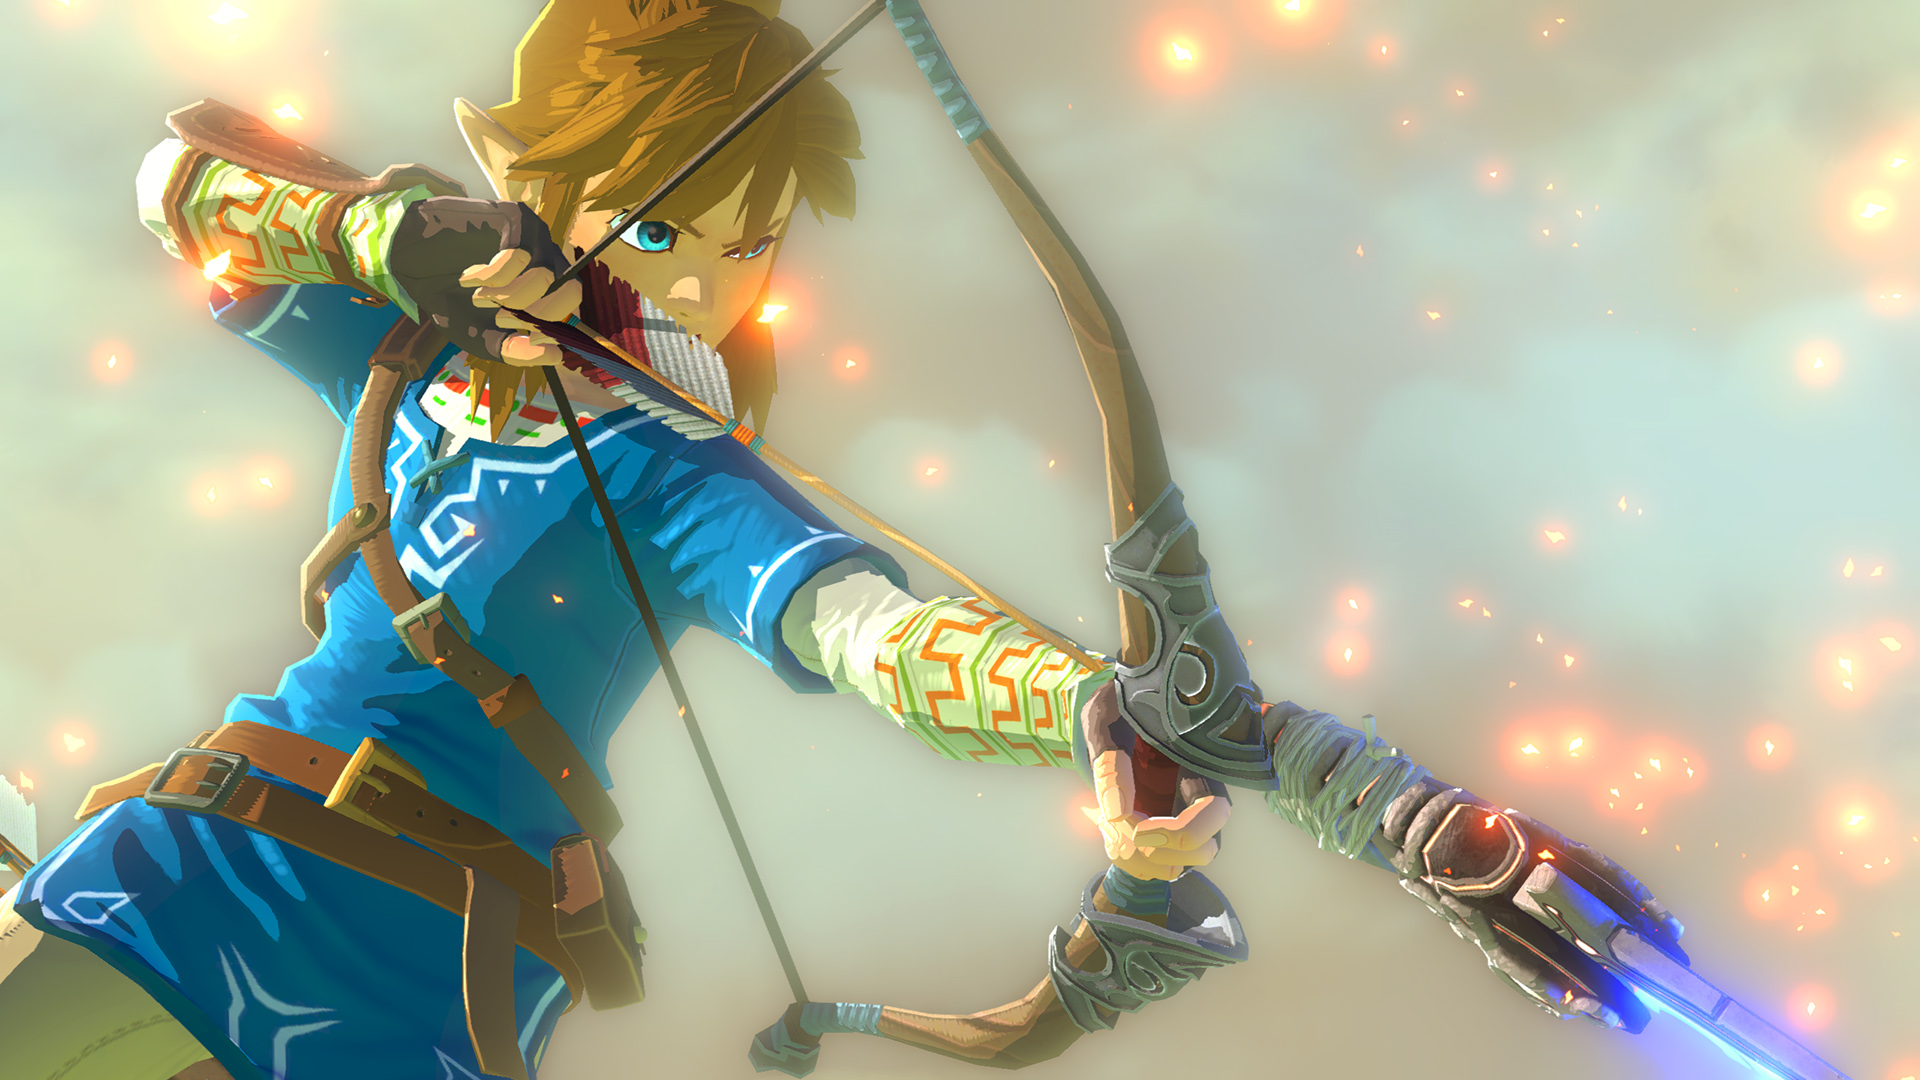 Zelda Wii U still on track for 2016, includes amiibo functionality